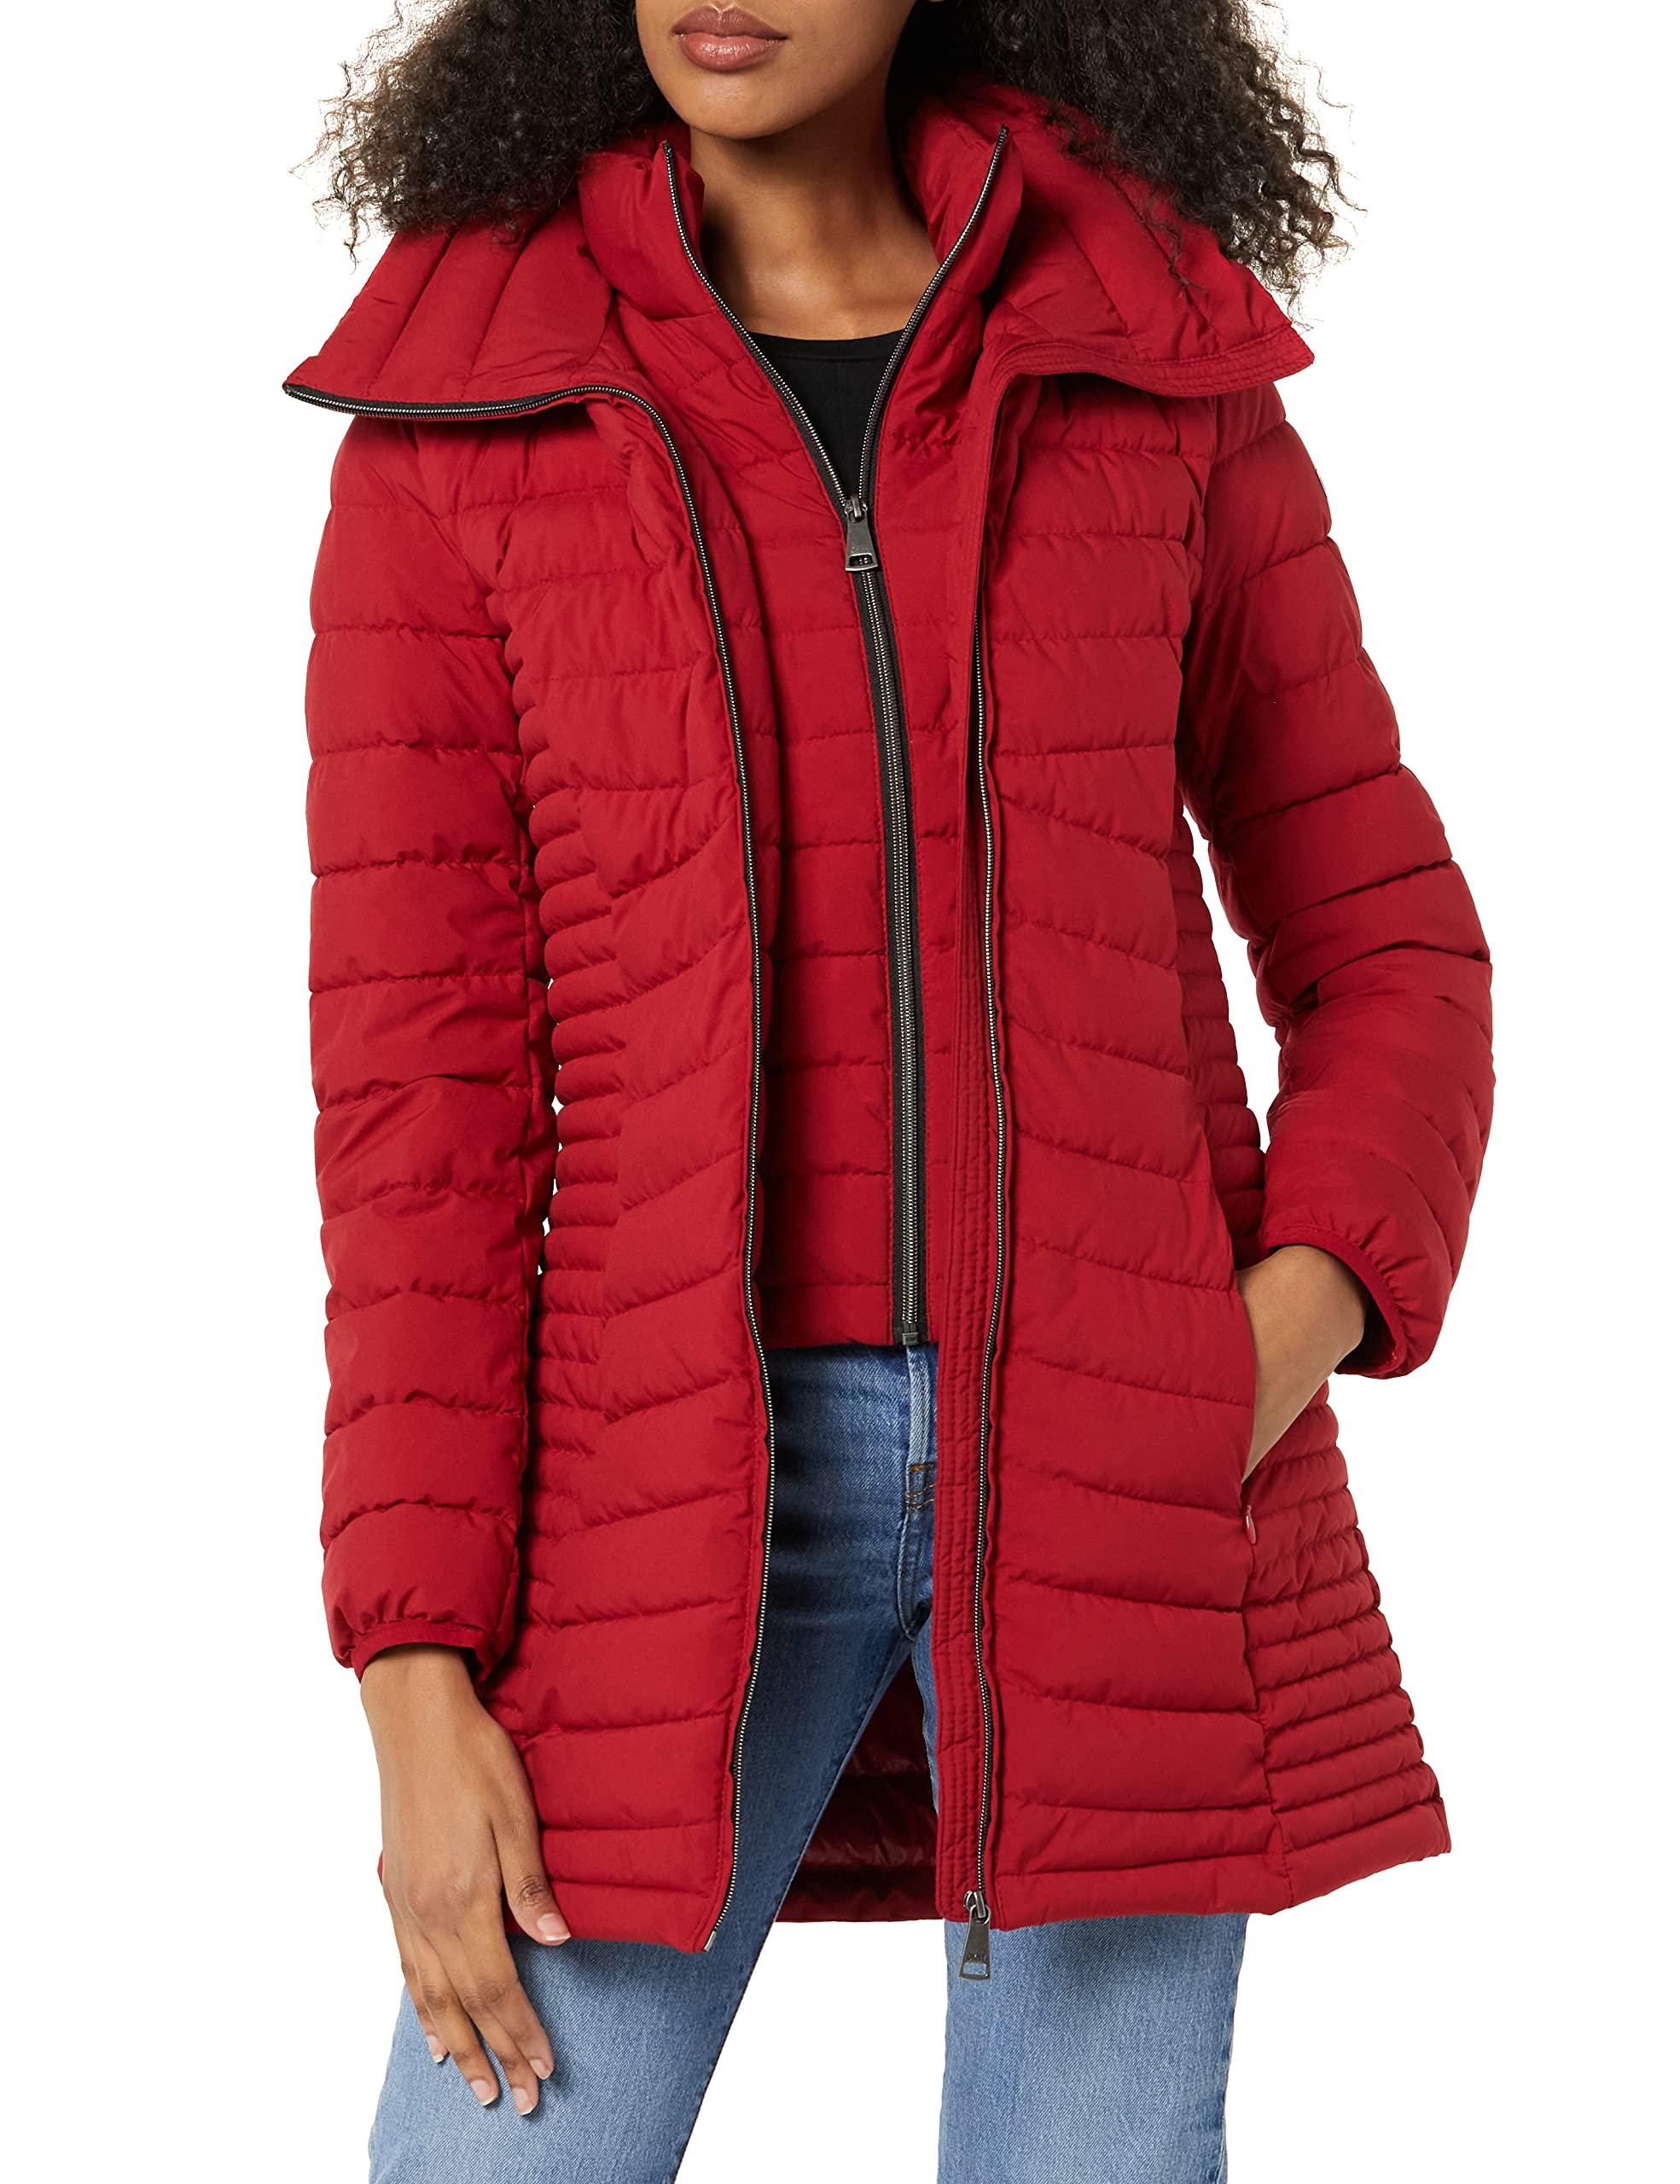 DKNY Everyday Outerwear Packable Stretchy Jacket in Red | Lyst